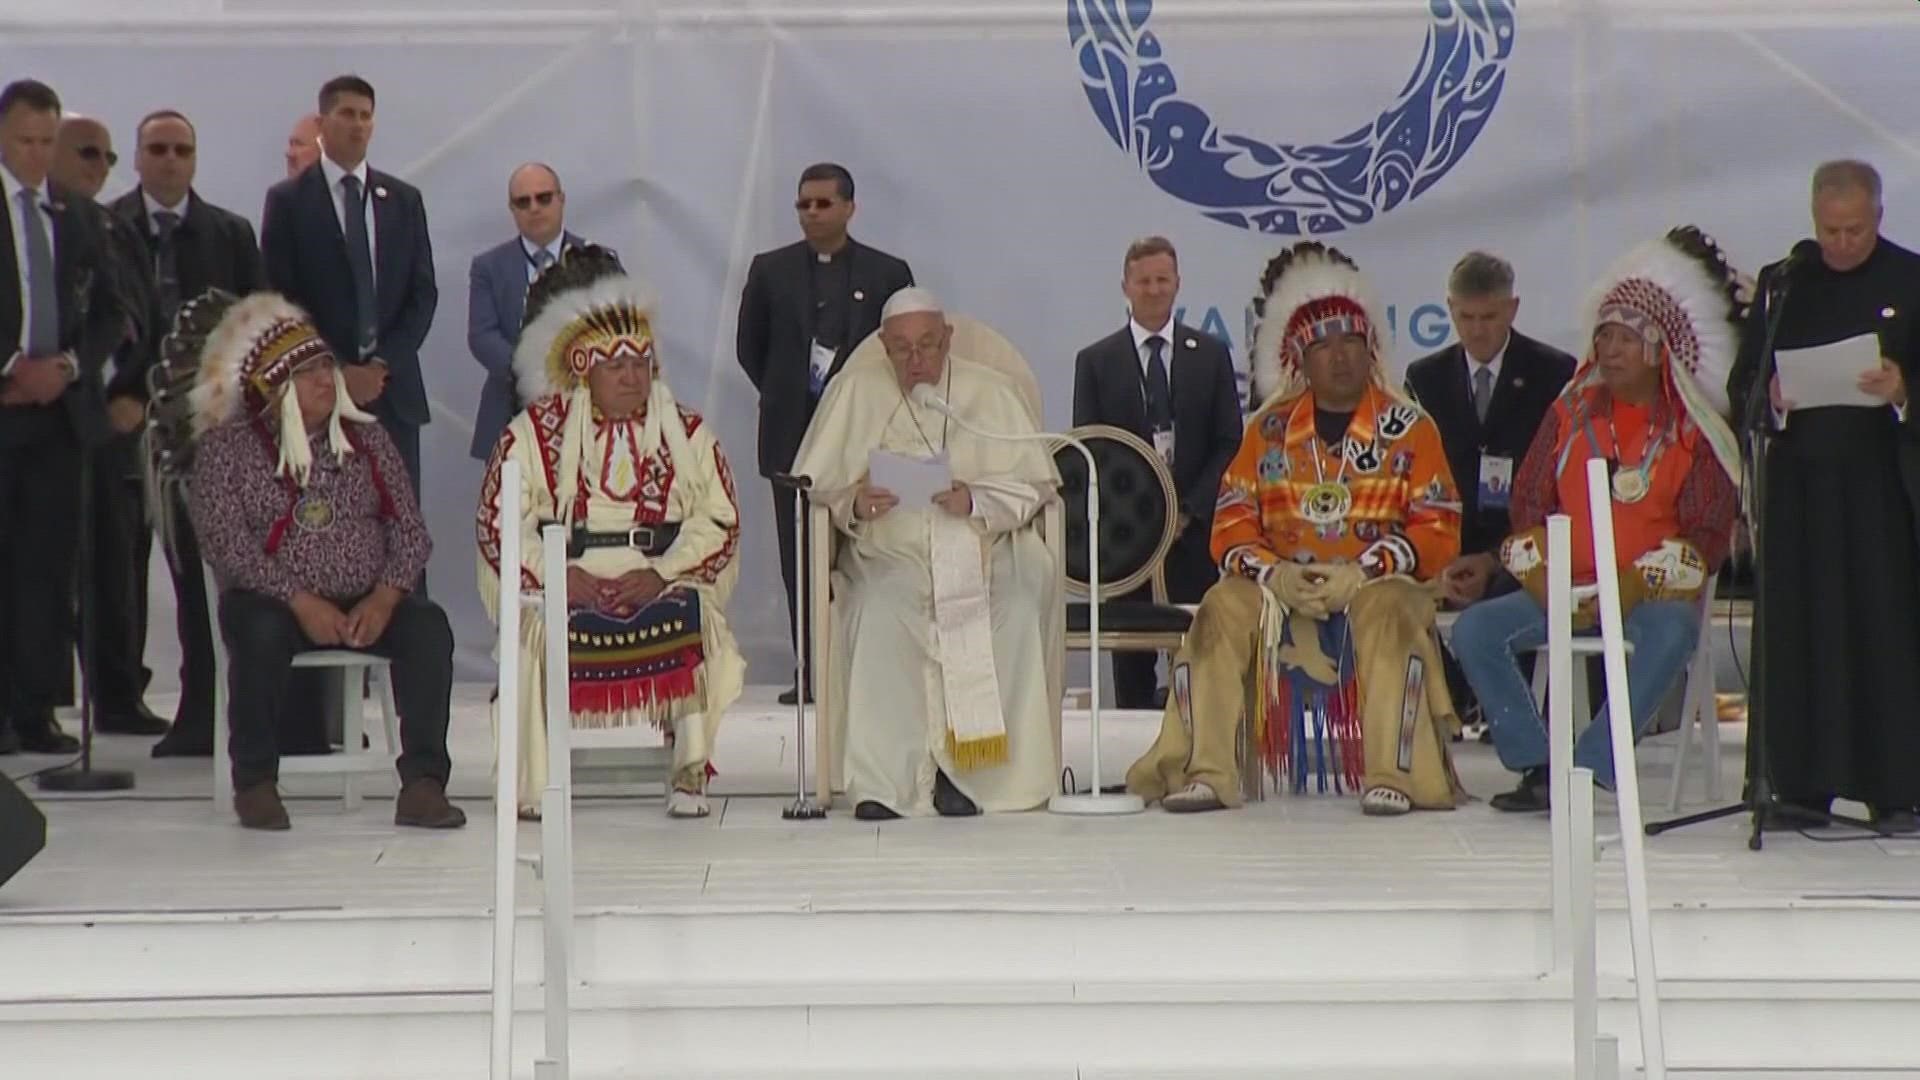 The pontiff says the forced assimilation of Native peoples into Christian society destroyed their cultures, severed their families and marginalized generations.